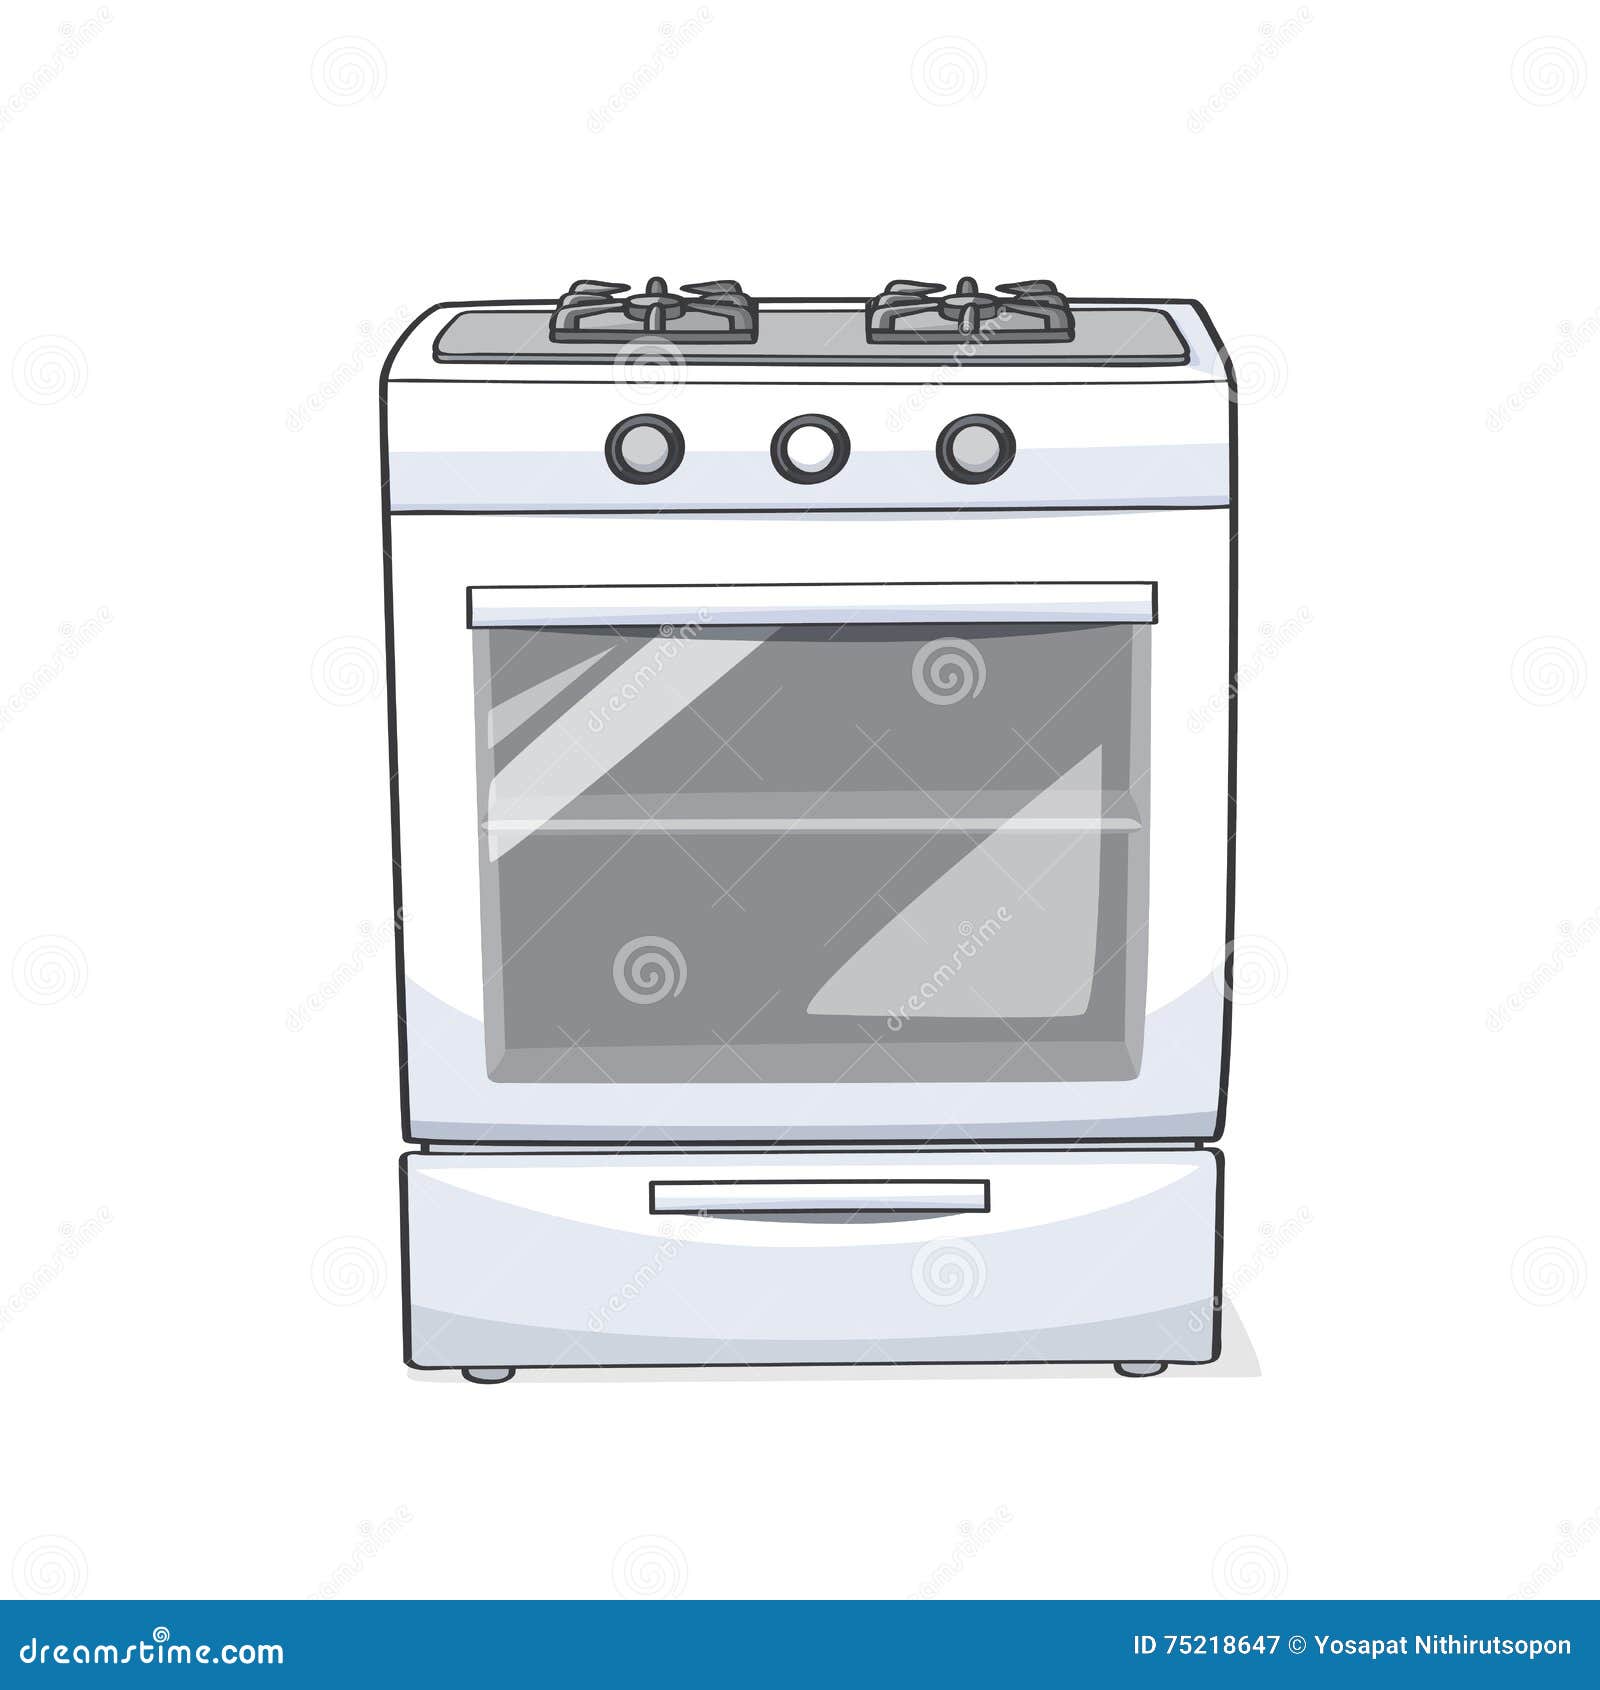 Oven Cartoons, Illustrations & Vector Stock Images - 6143 ...